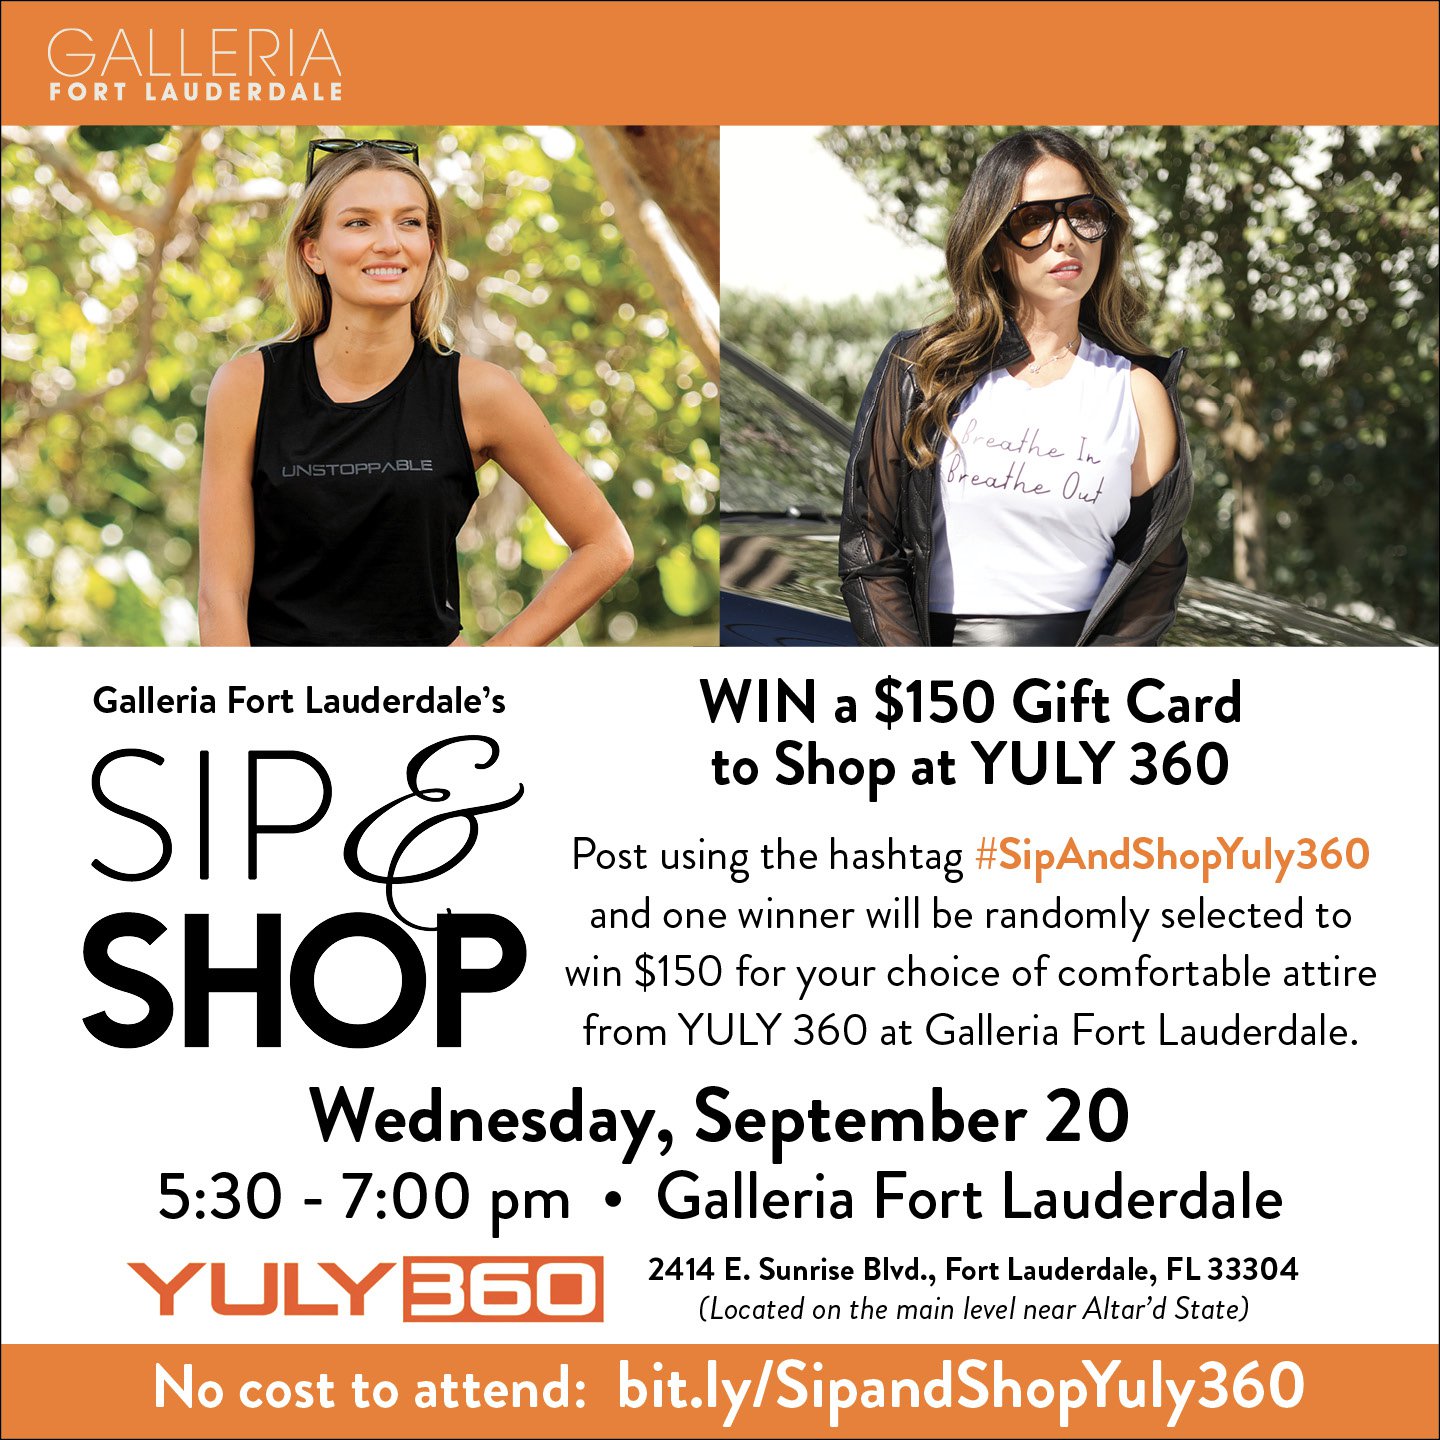 Galleria Fort Lauderdale's “Sip & Shop” at Yuly360 to Benefit